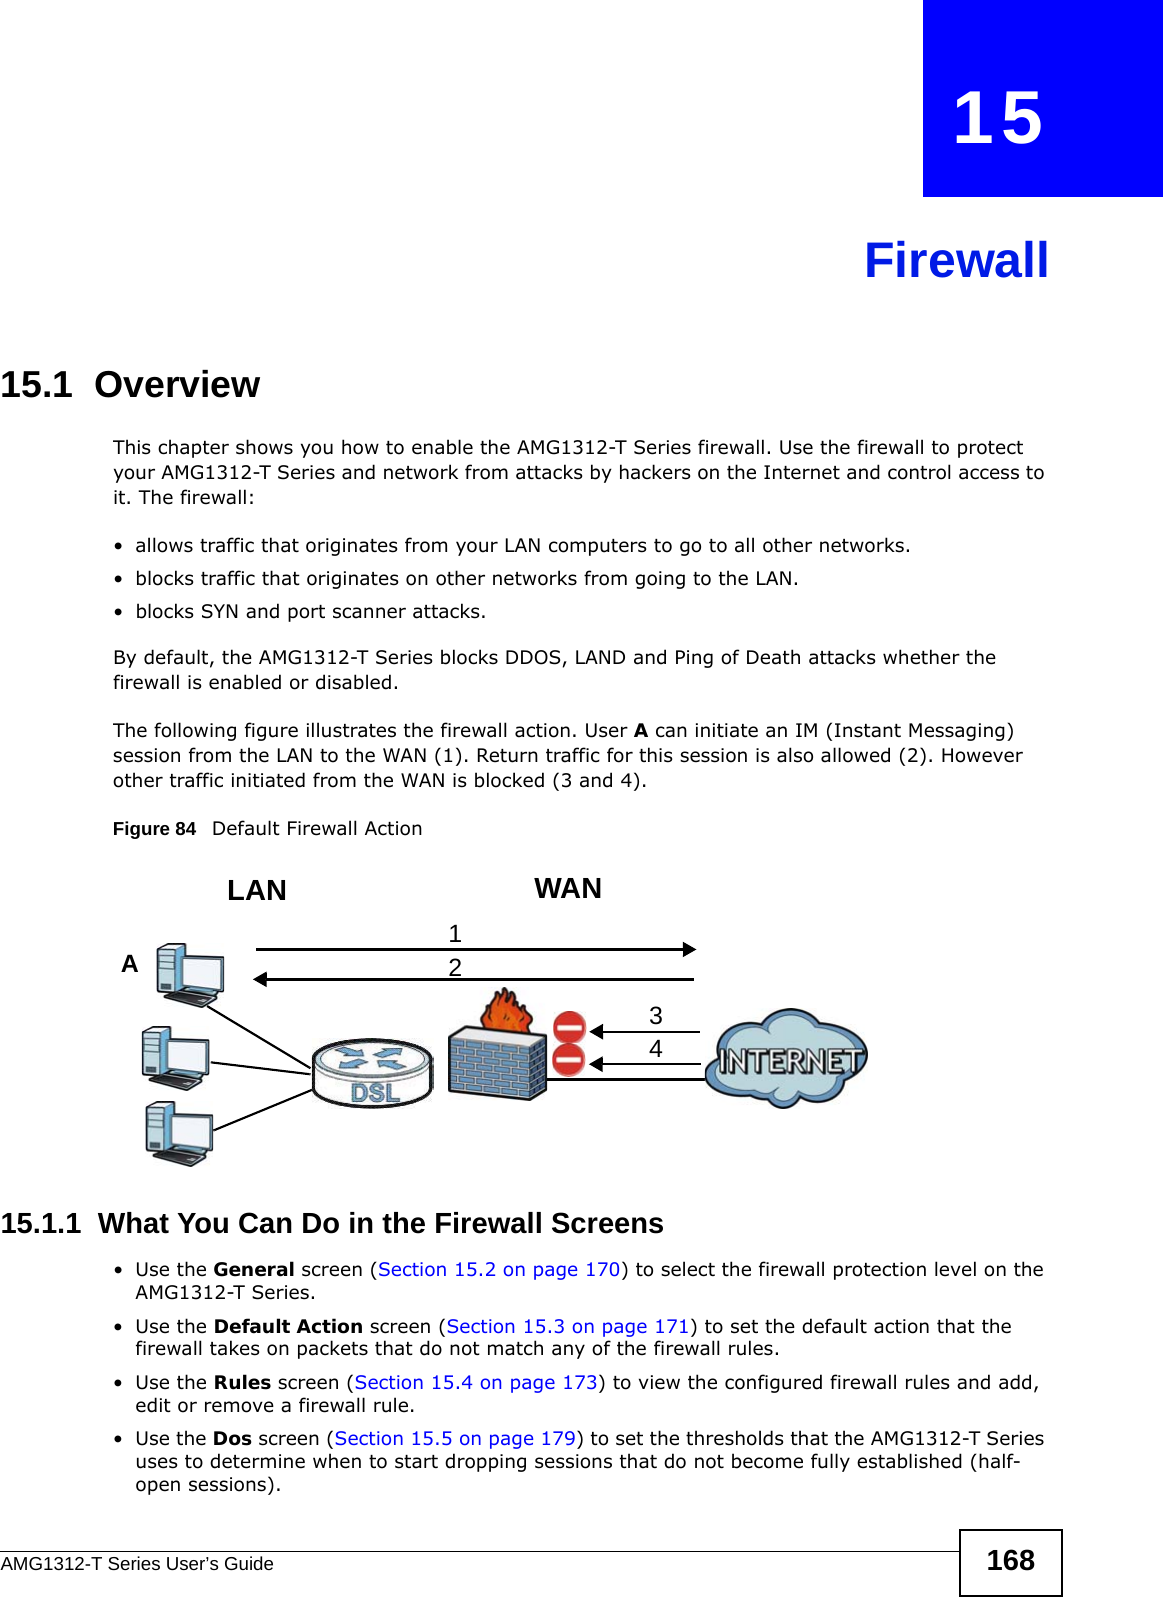 AMG1312-T Series User’s Guide 168CHAPTER   15Firewall15.1  OverviewThis chapter shows you how to enable the AMG1312-T Series firewall. Use the firewall to protect your AMG1312-T Series and network from attacks by hackers on the Internet and control access to it. The firewall:• allows traffic that originates from your LAN computers to go to all other networks. • blocks traffic that originates on other networks from going to the LAN.• blocks SYN and port scanner attacks.By default, the AMG1312-T Series blocks DDOS, LAND and Ping of Death attacks whether the firewall is enabled or disabled.The following figure illustrates the firewall action. User A can initiate an IM (Instant Messaging) session from the LAN to the WAN (1). Return traffic for this session is also allowed (2). However other traffic initiated from the WAN is blocked (3 and 4).Figure 84   Default Firewall Action15.1.1  What You Can Do in the Firewall Screens•Use the General screen (Section 15.2 on page 170) to select the firewall protection level on the AMG1312-T Series.•Use the Default Action screen (Section 15.3 on page 171) to set the default action that the firewall takes on packets that do not match any of the firewall rules.•Use the Rules screen (Section 15.4 on page 173) to view the configured firewall rules and add, edit or remove a firewall rule.•Use the Dos screen (Section 15.5 on page 179) to set the thresholds that the AMG1312-T Series uses to determine when to start dropping sessions that do not become fully established (half-open sessions).WANLAN3412A